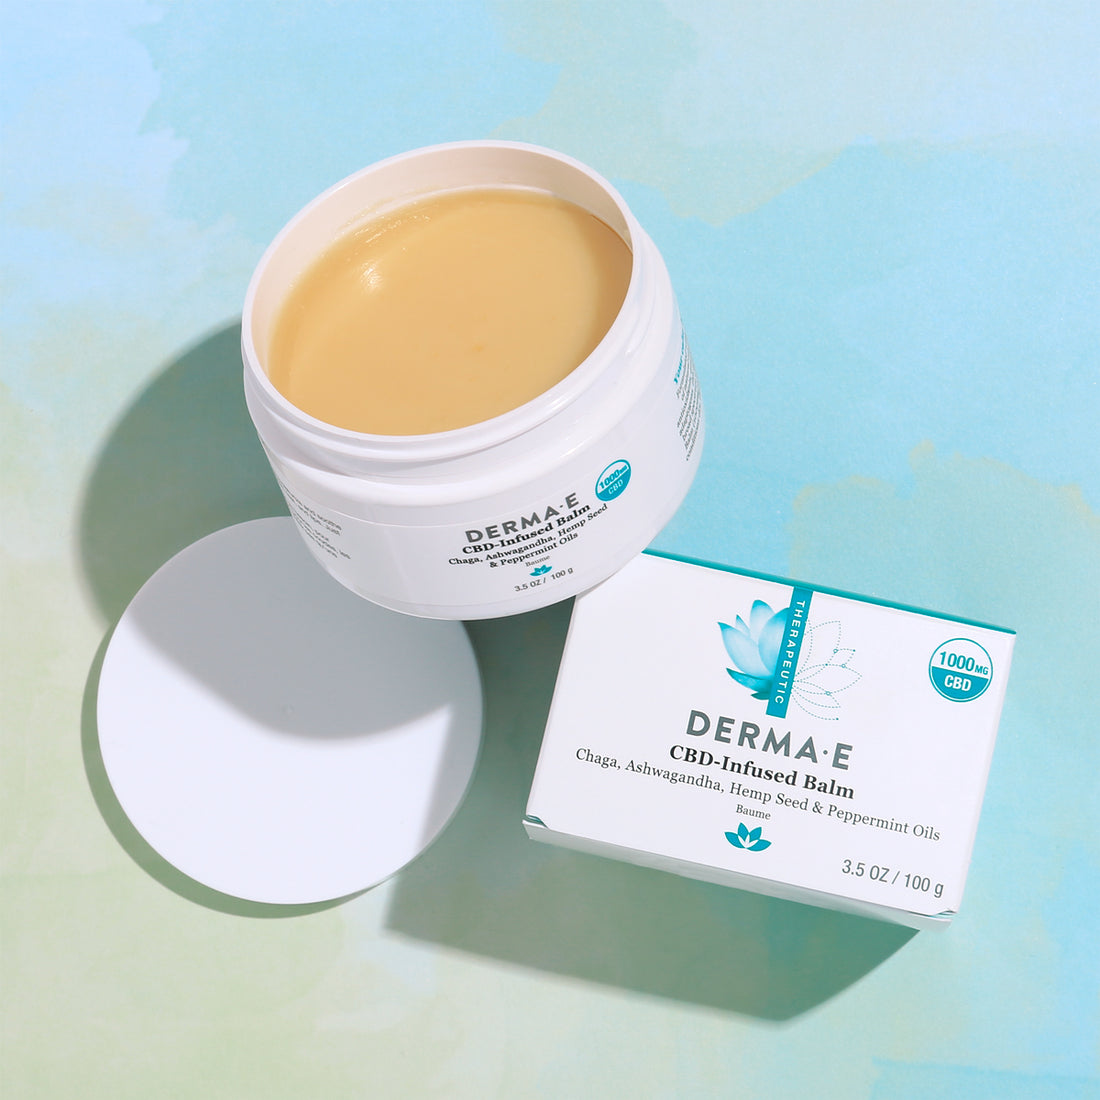 CBD in Skincare: Uses and Benefits of CBD Balm